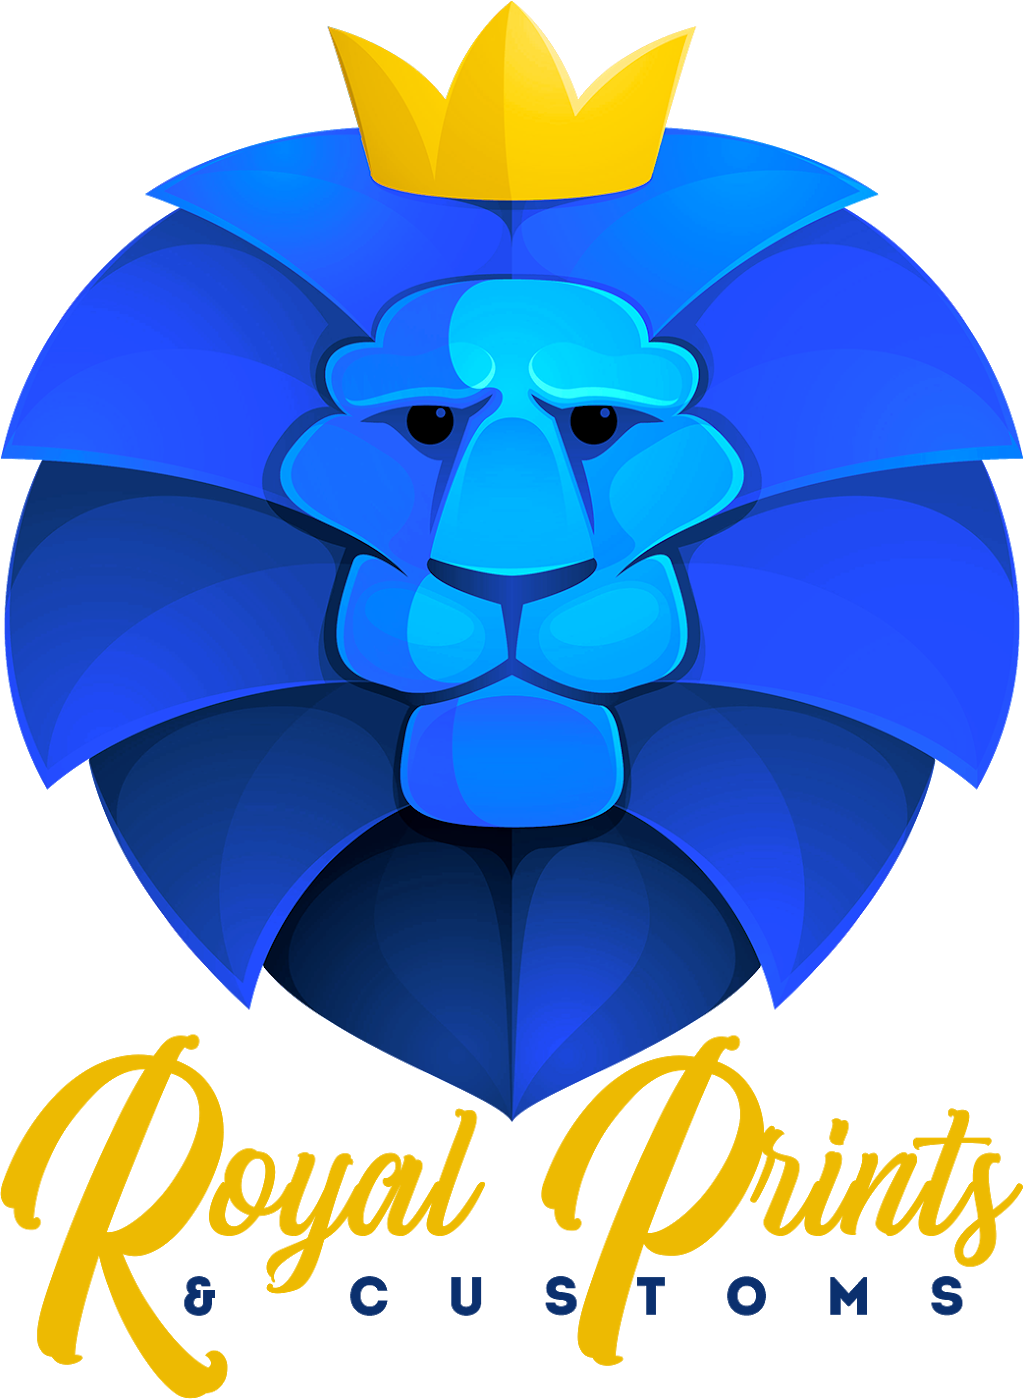 Royal Prints & Customs | 5001 Brentwood Stair Rd #200, Fort Worth, TX 76112 | Phone: (817) 913-9265